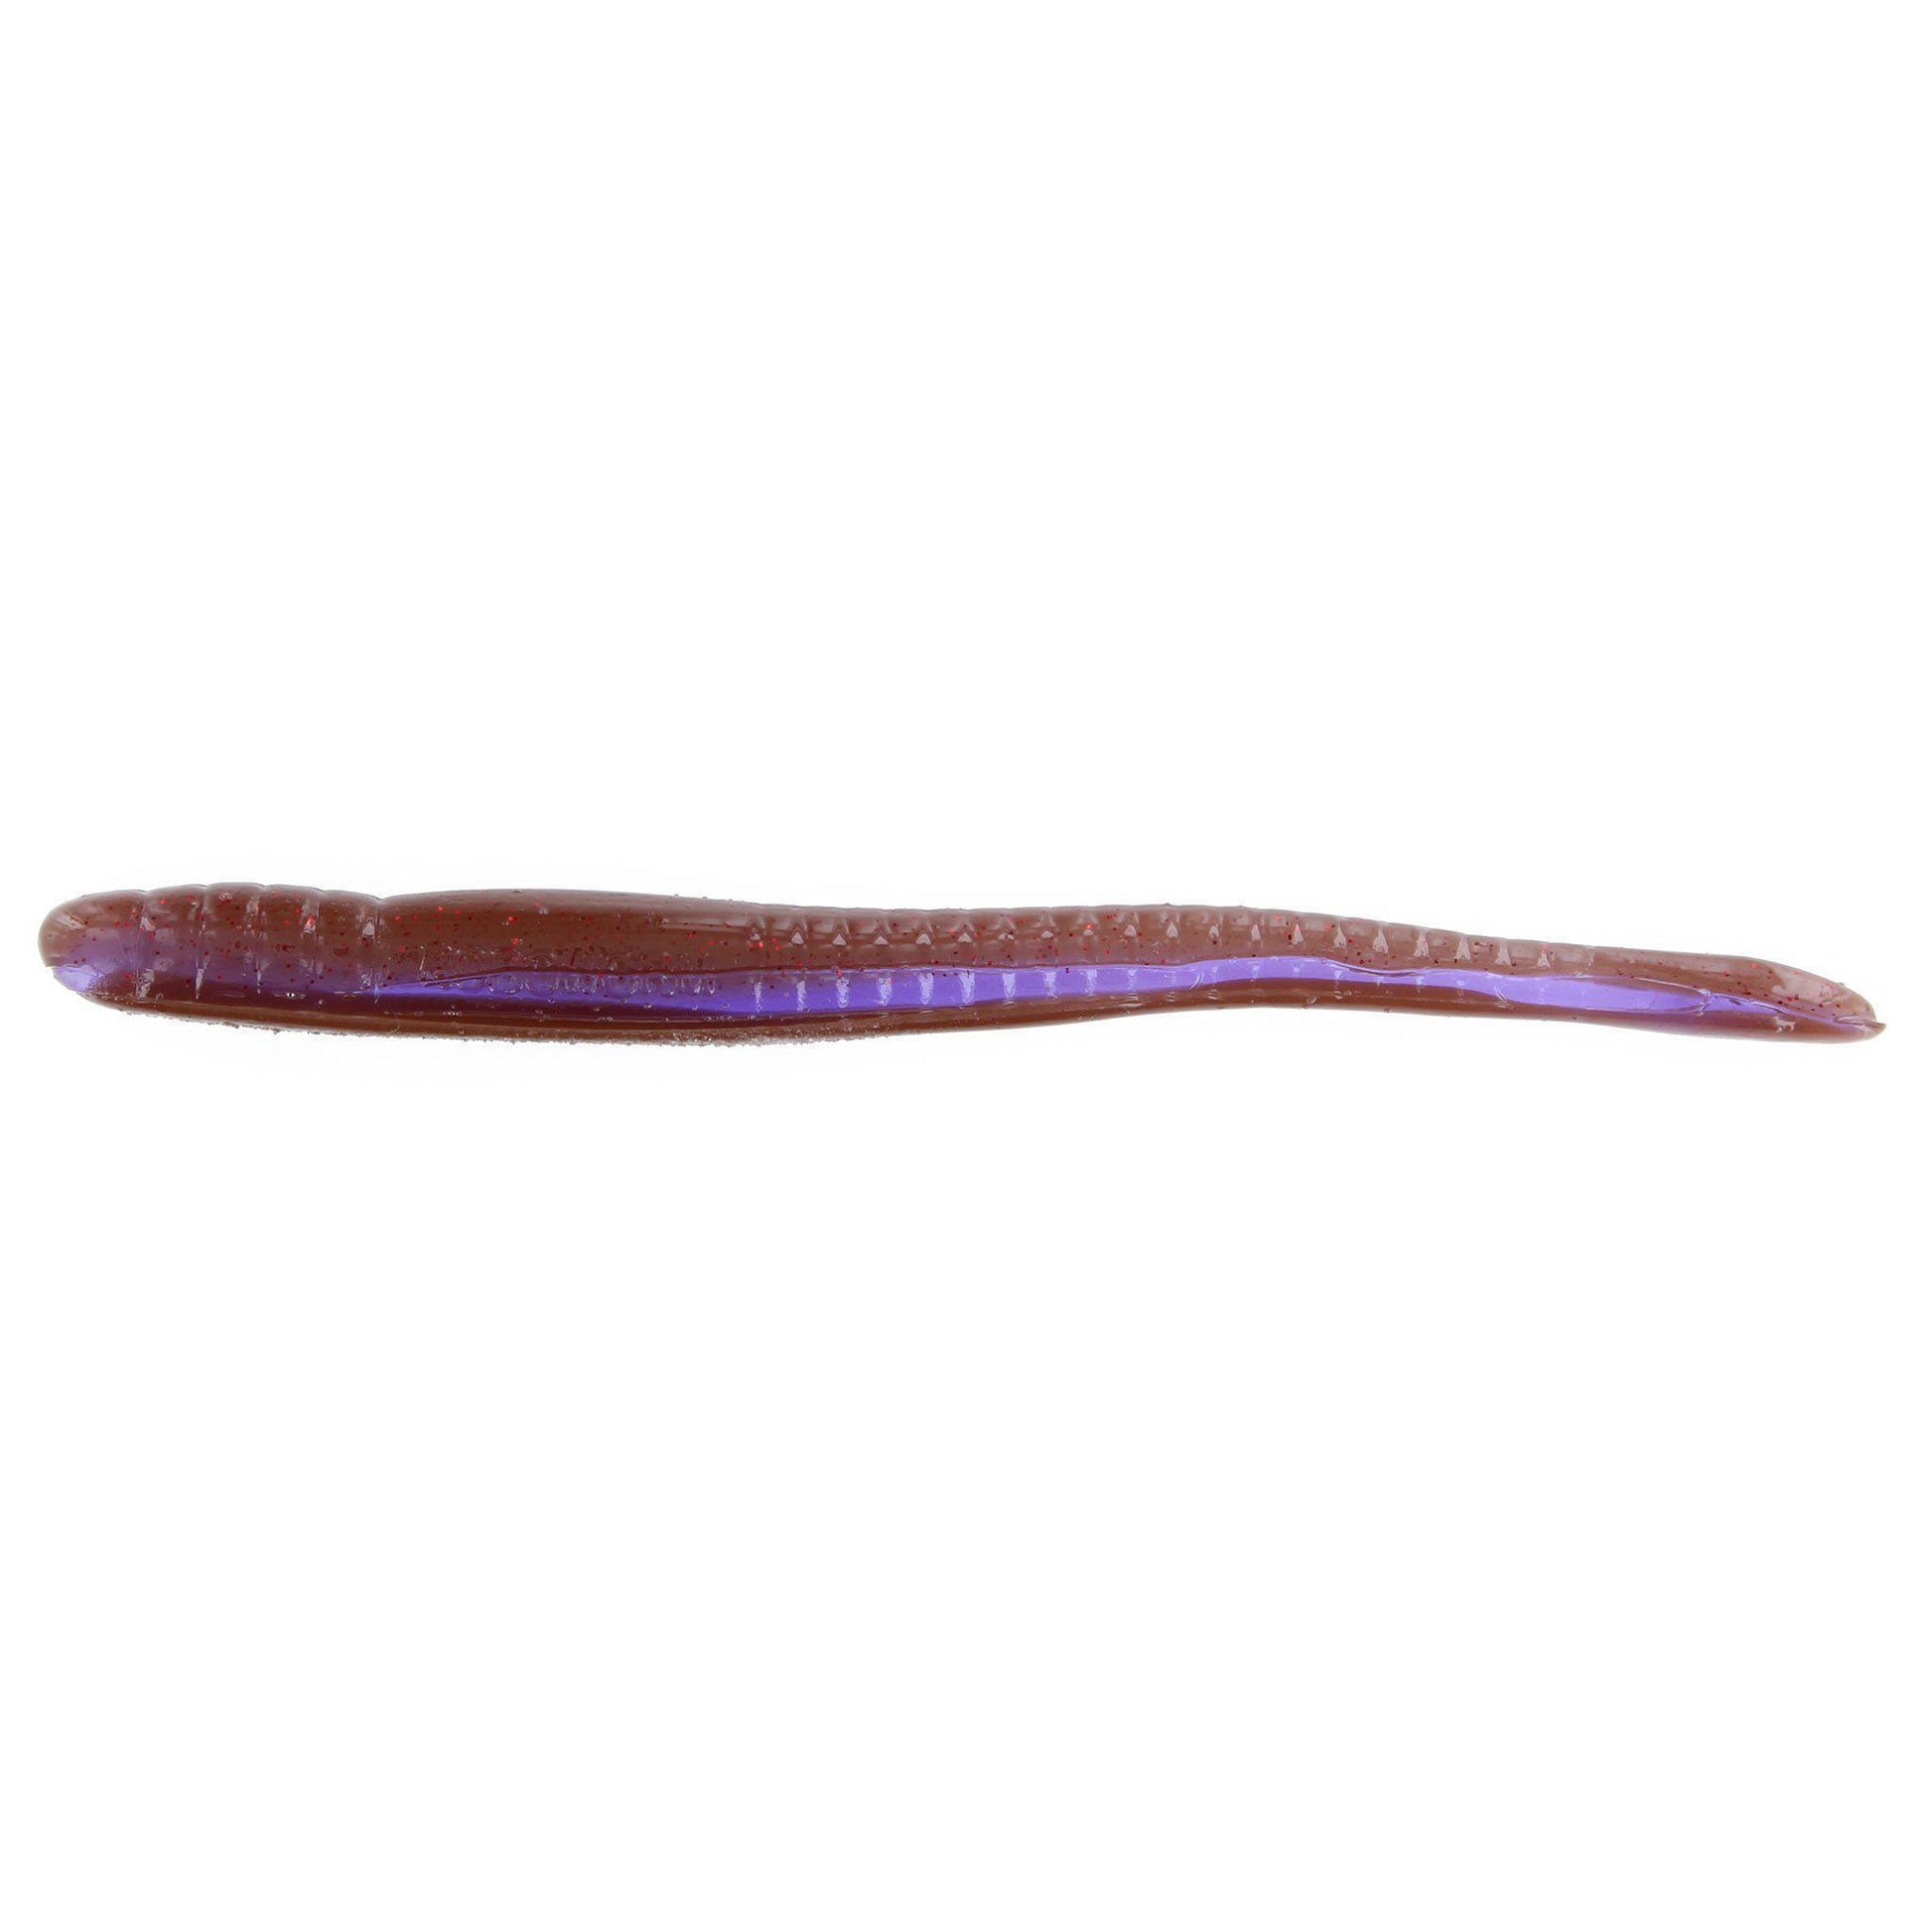 Roboworm Fat Straight Tail 6 Sf-A2Ar Oxblood Light/Red Flake 8Pk